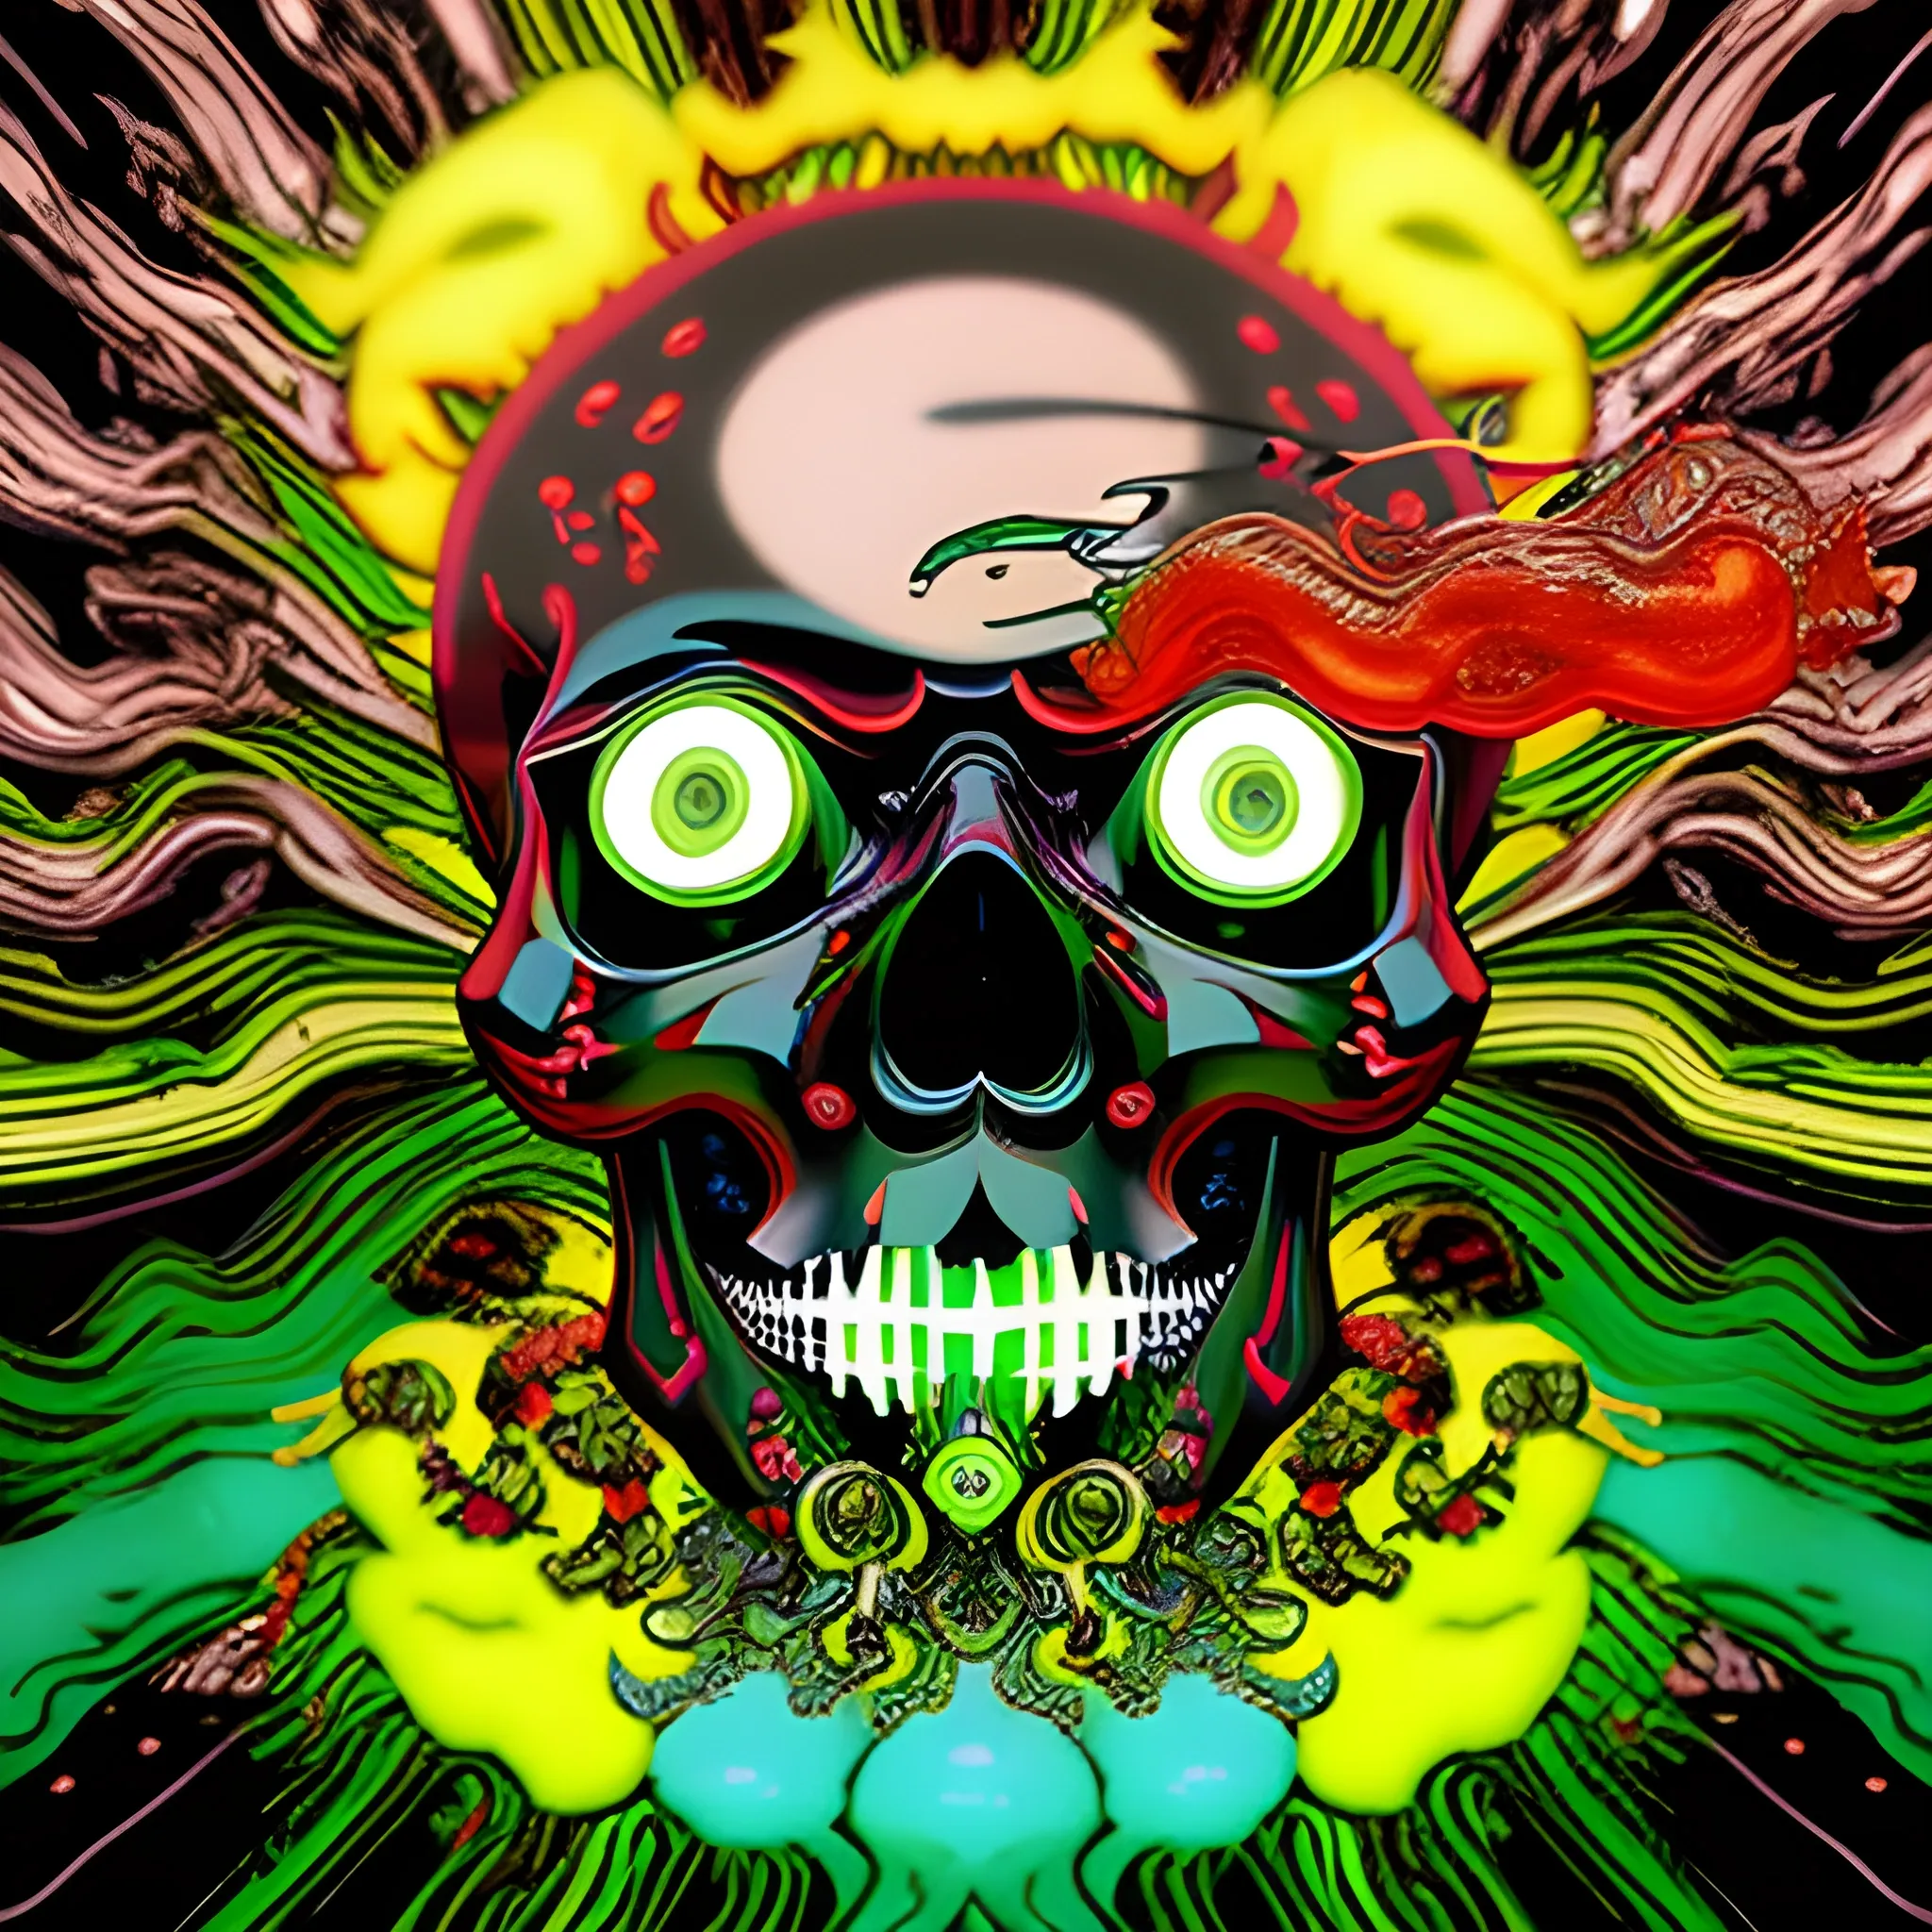 rfktrstyle A 4k death skull controlling and manipulating out of control fire and water, multicolor fire, freshy, surrounded by chibiStyle hooded-sugar-skulls, (yellow&red colored fire)(black&green colored water:1.5), tangled, elemental splash, detailed glowing demon eyes, Dynamic, vivid, creative, soft shadow, perfect anatomy, perfect hands, hyperdetailed artwork,tshirt design,  perfectly centred, neo-expressionist oil paint, centred, posing portrait by hajime sorayama, Cartoon